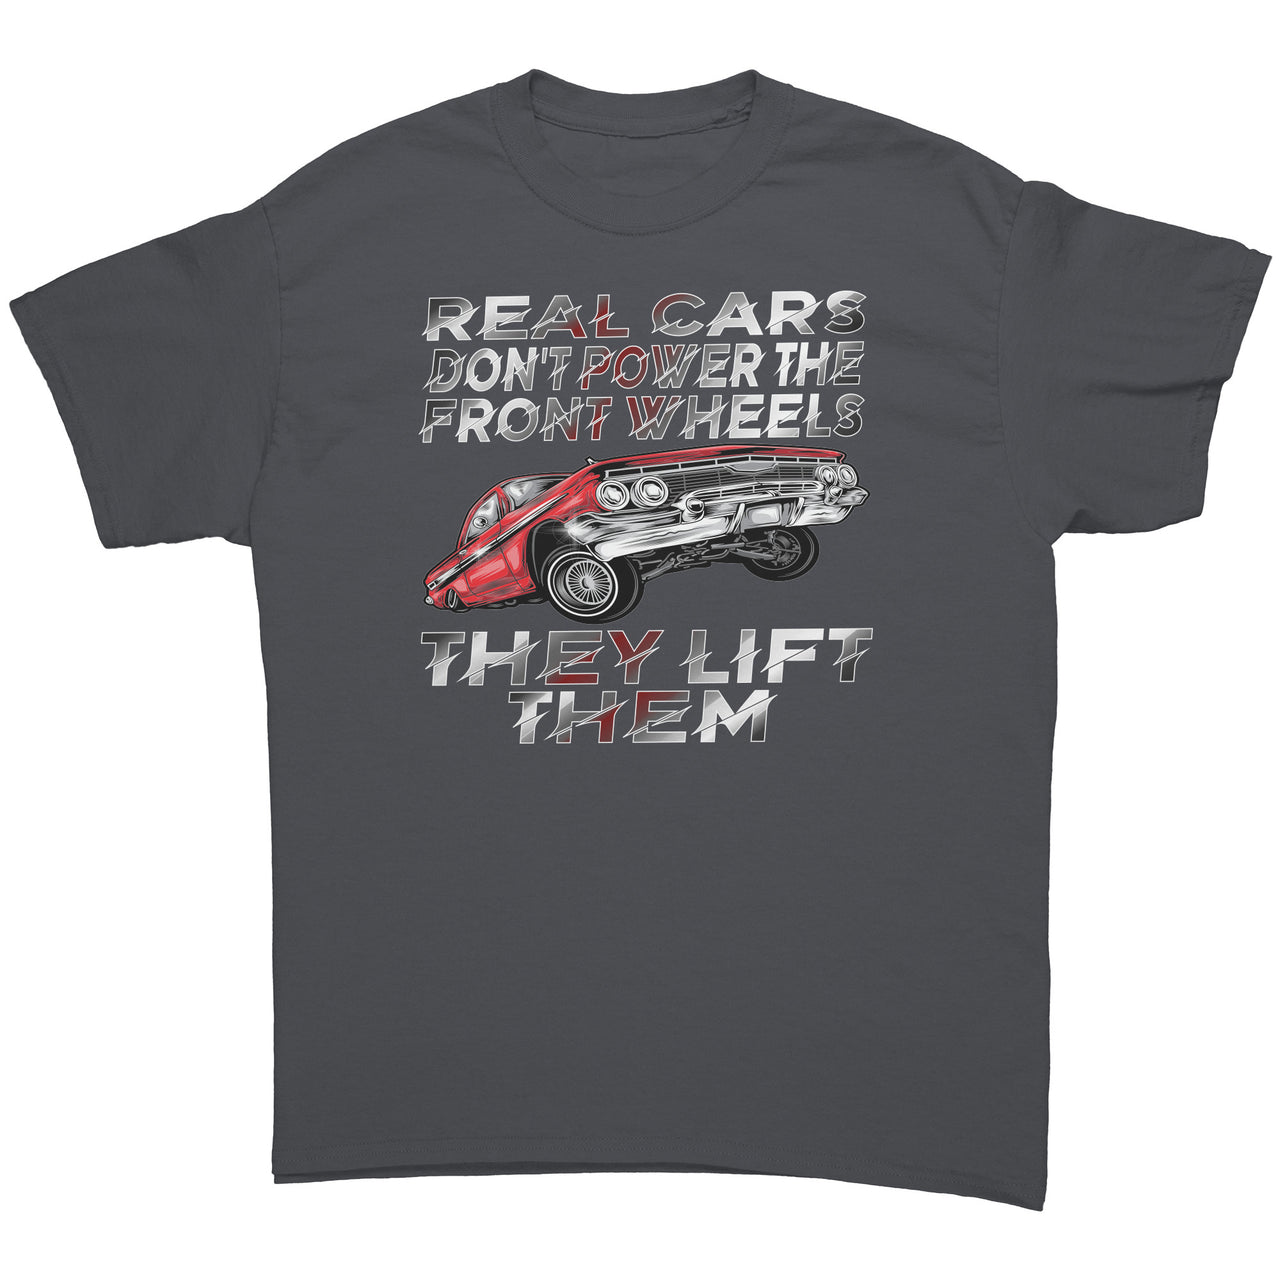 Real Cars Don't Power The Front Wheels They Lift Them T-Shirts